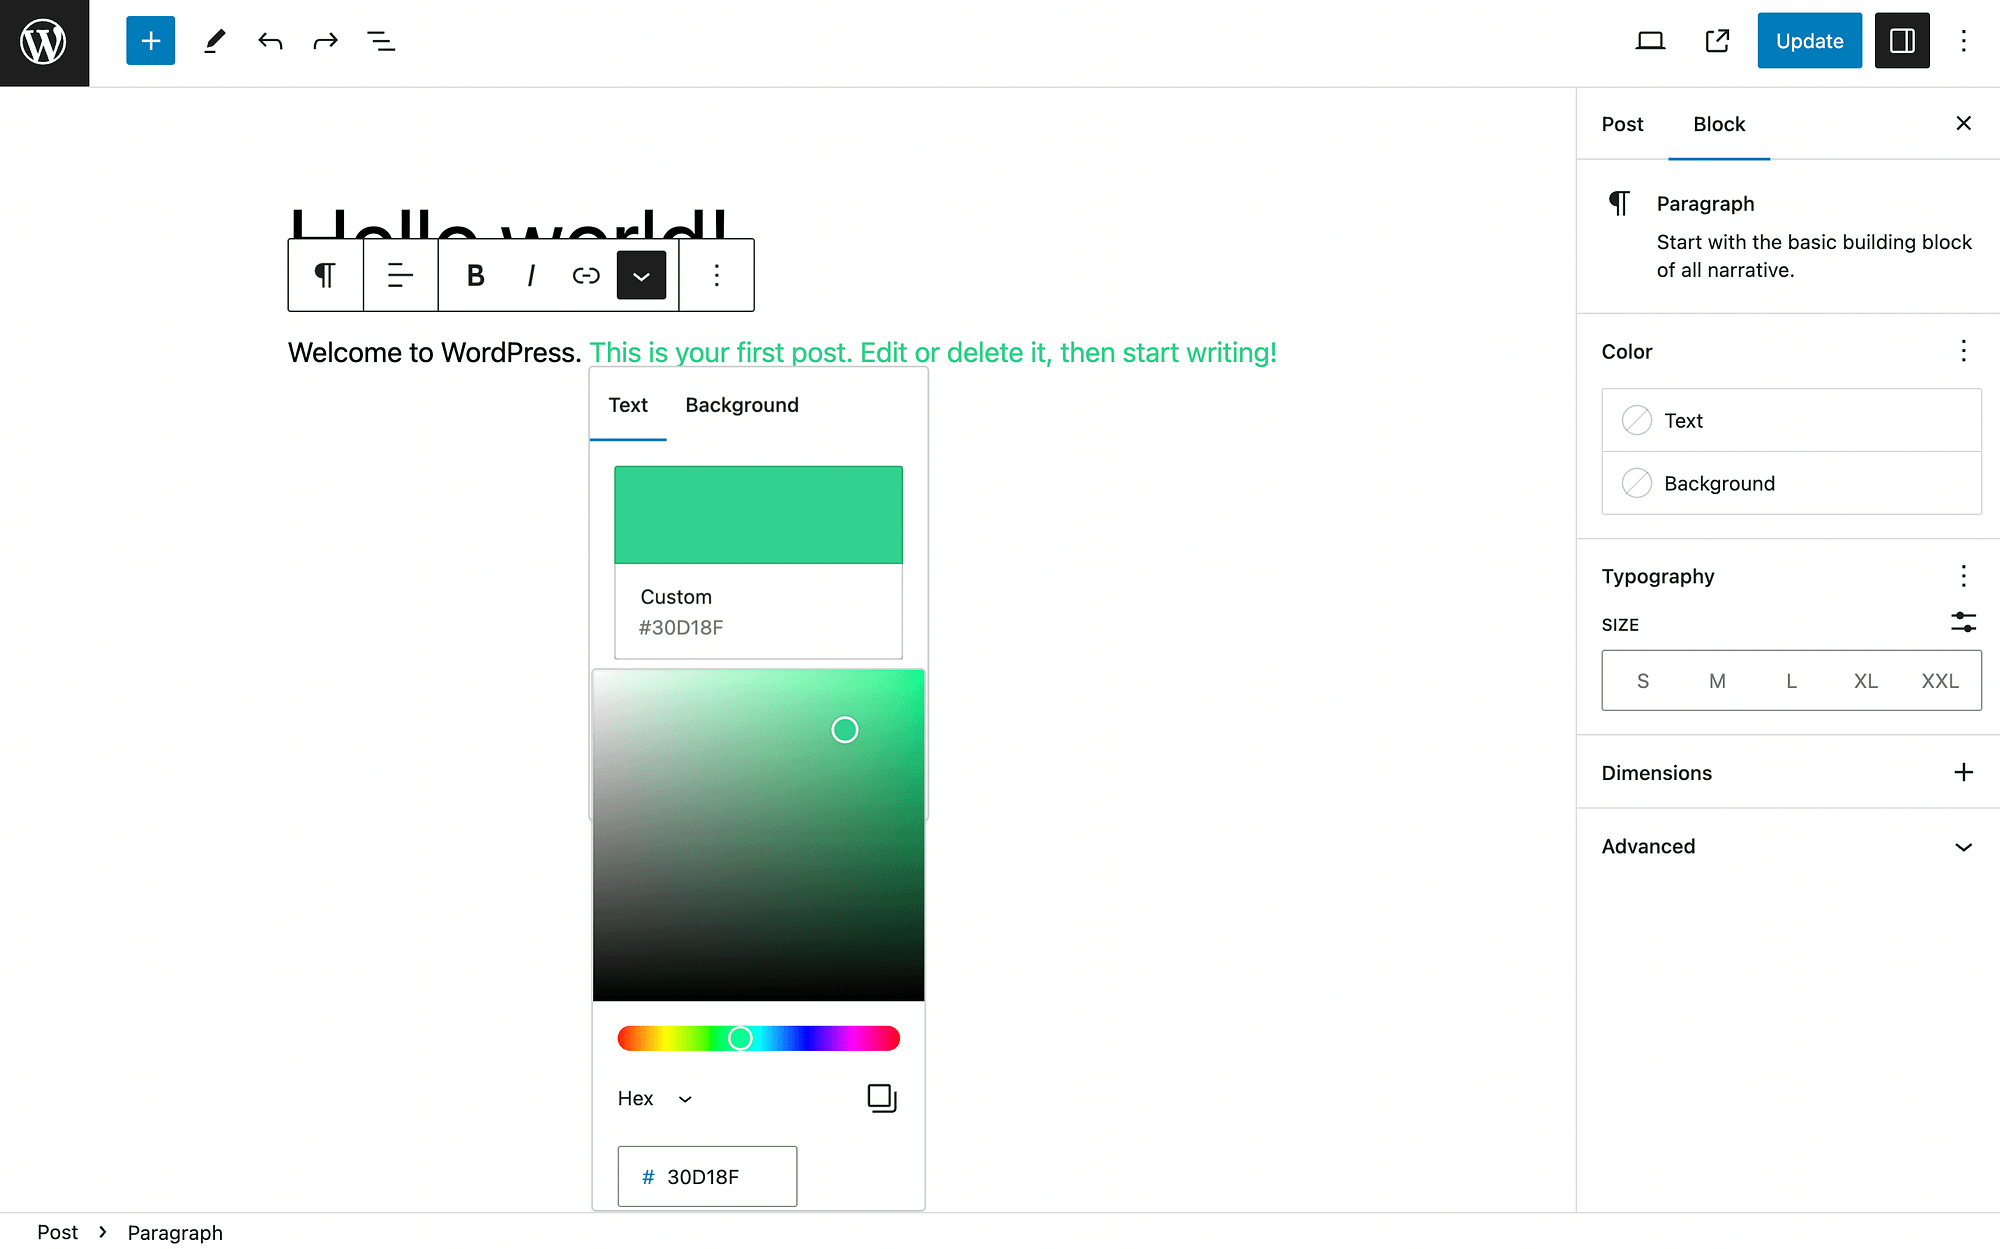 Choosing a text color from the WordPress color picker.